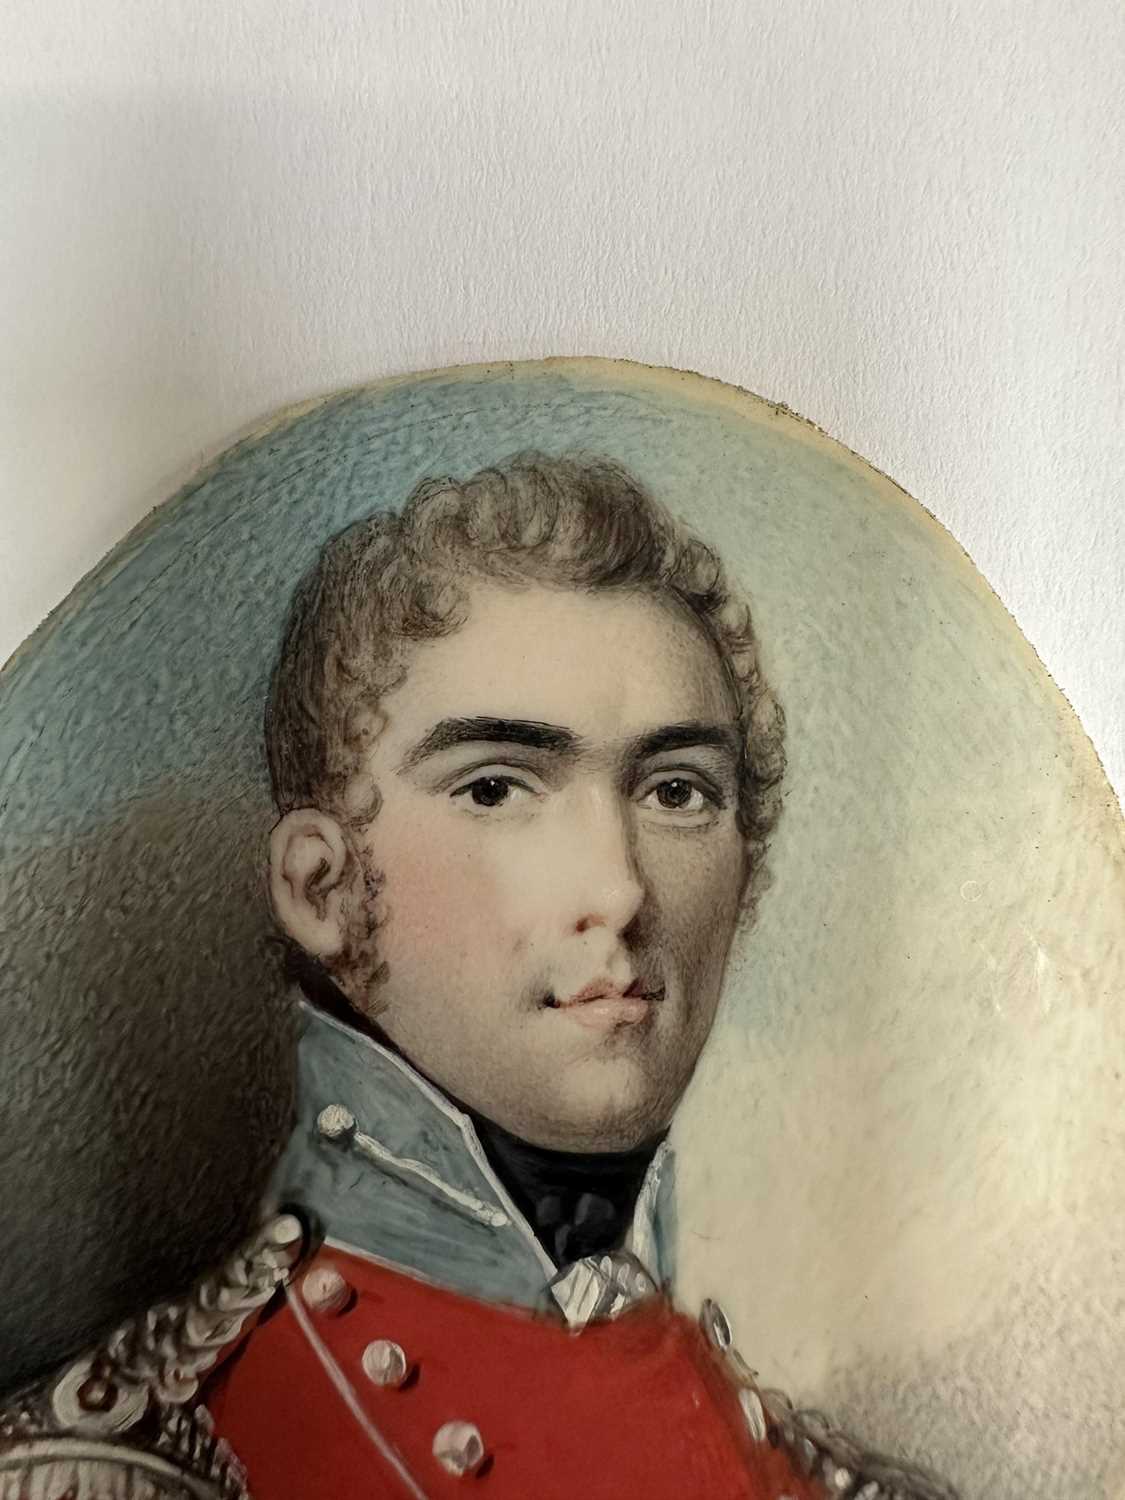 Nicholas Freese (active 1794-1814) portrait miniature on ivory - Portrait of an Office - Image 14 of 16